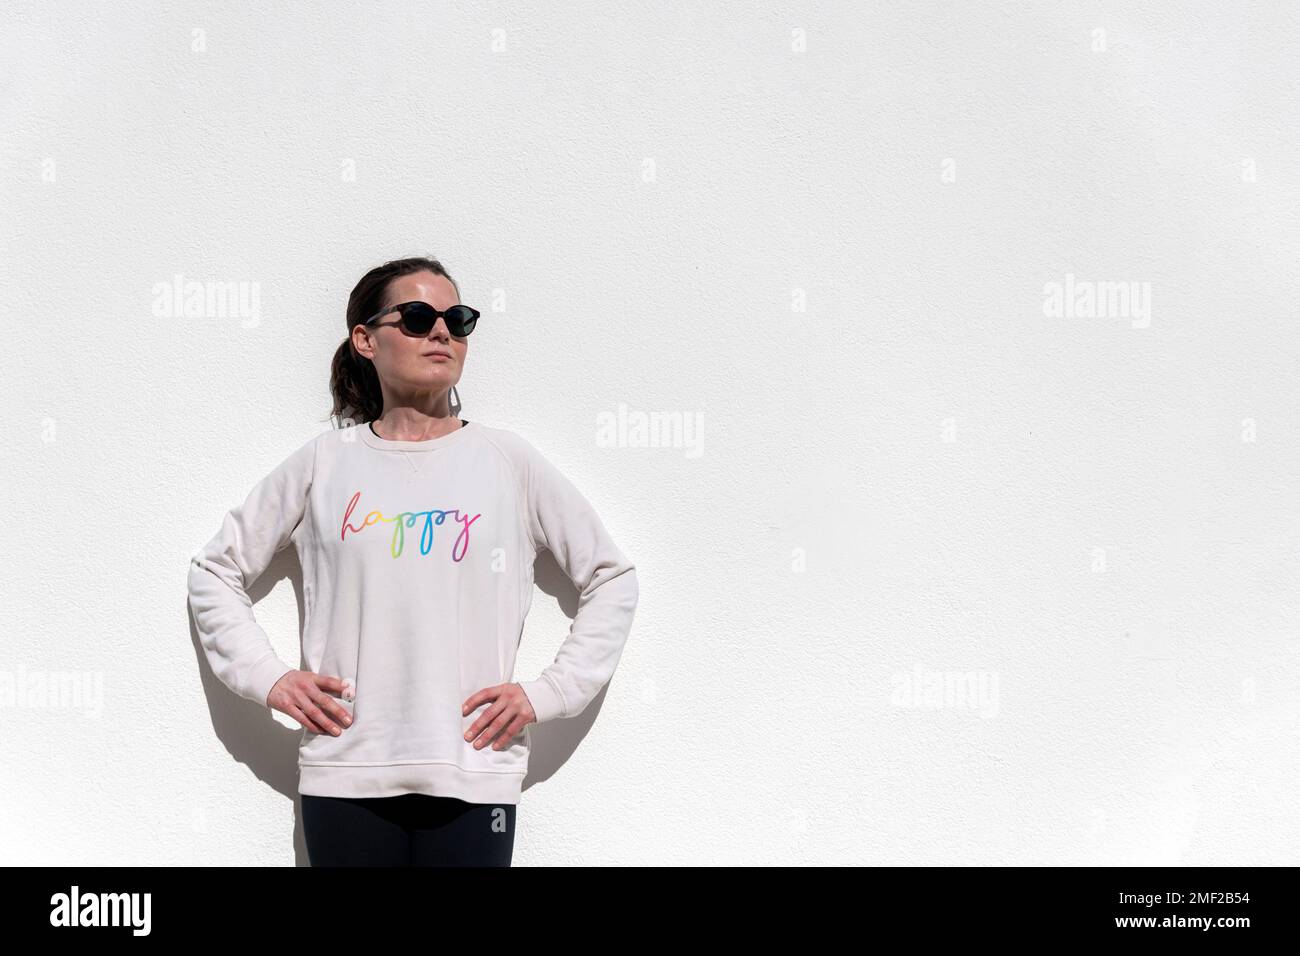 Woman standing against a white wall with hands on hips wearing a sweatshirt with happy slogan on it. Stock Photo